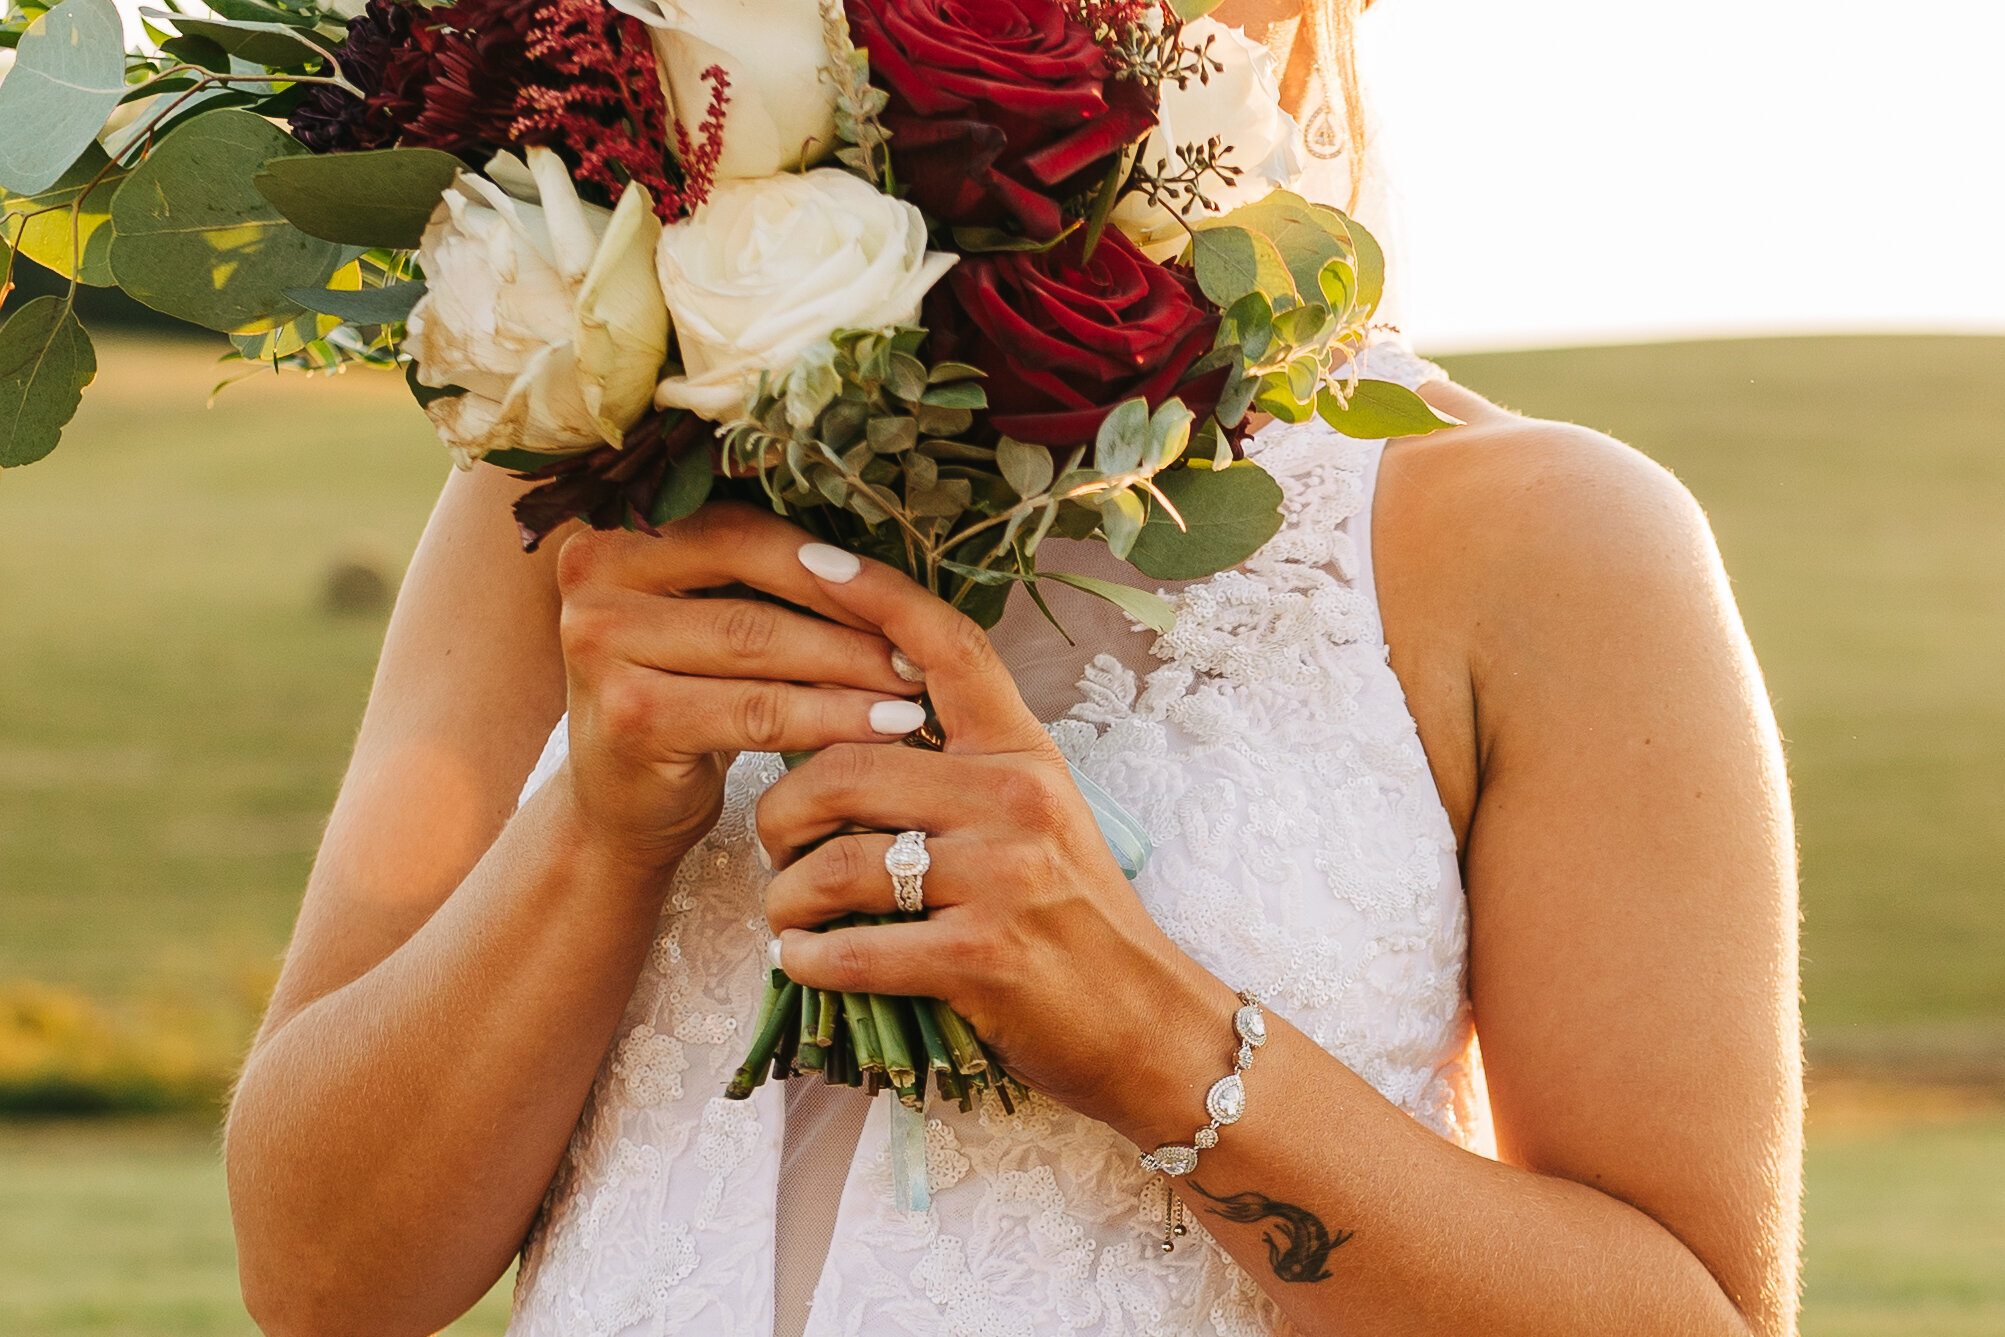 Bride holding her white and red rose bouquet